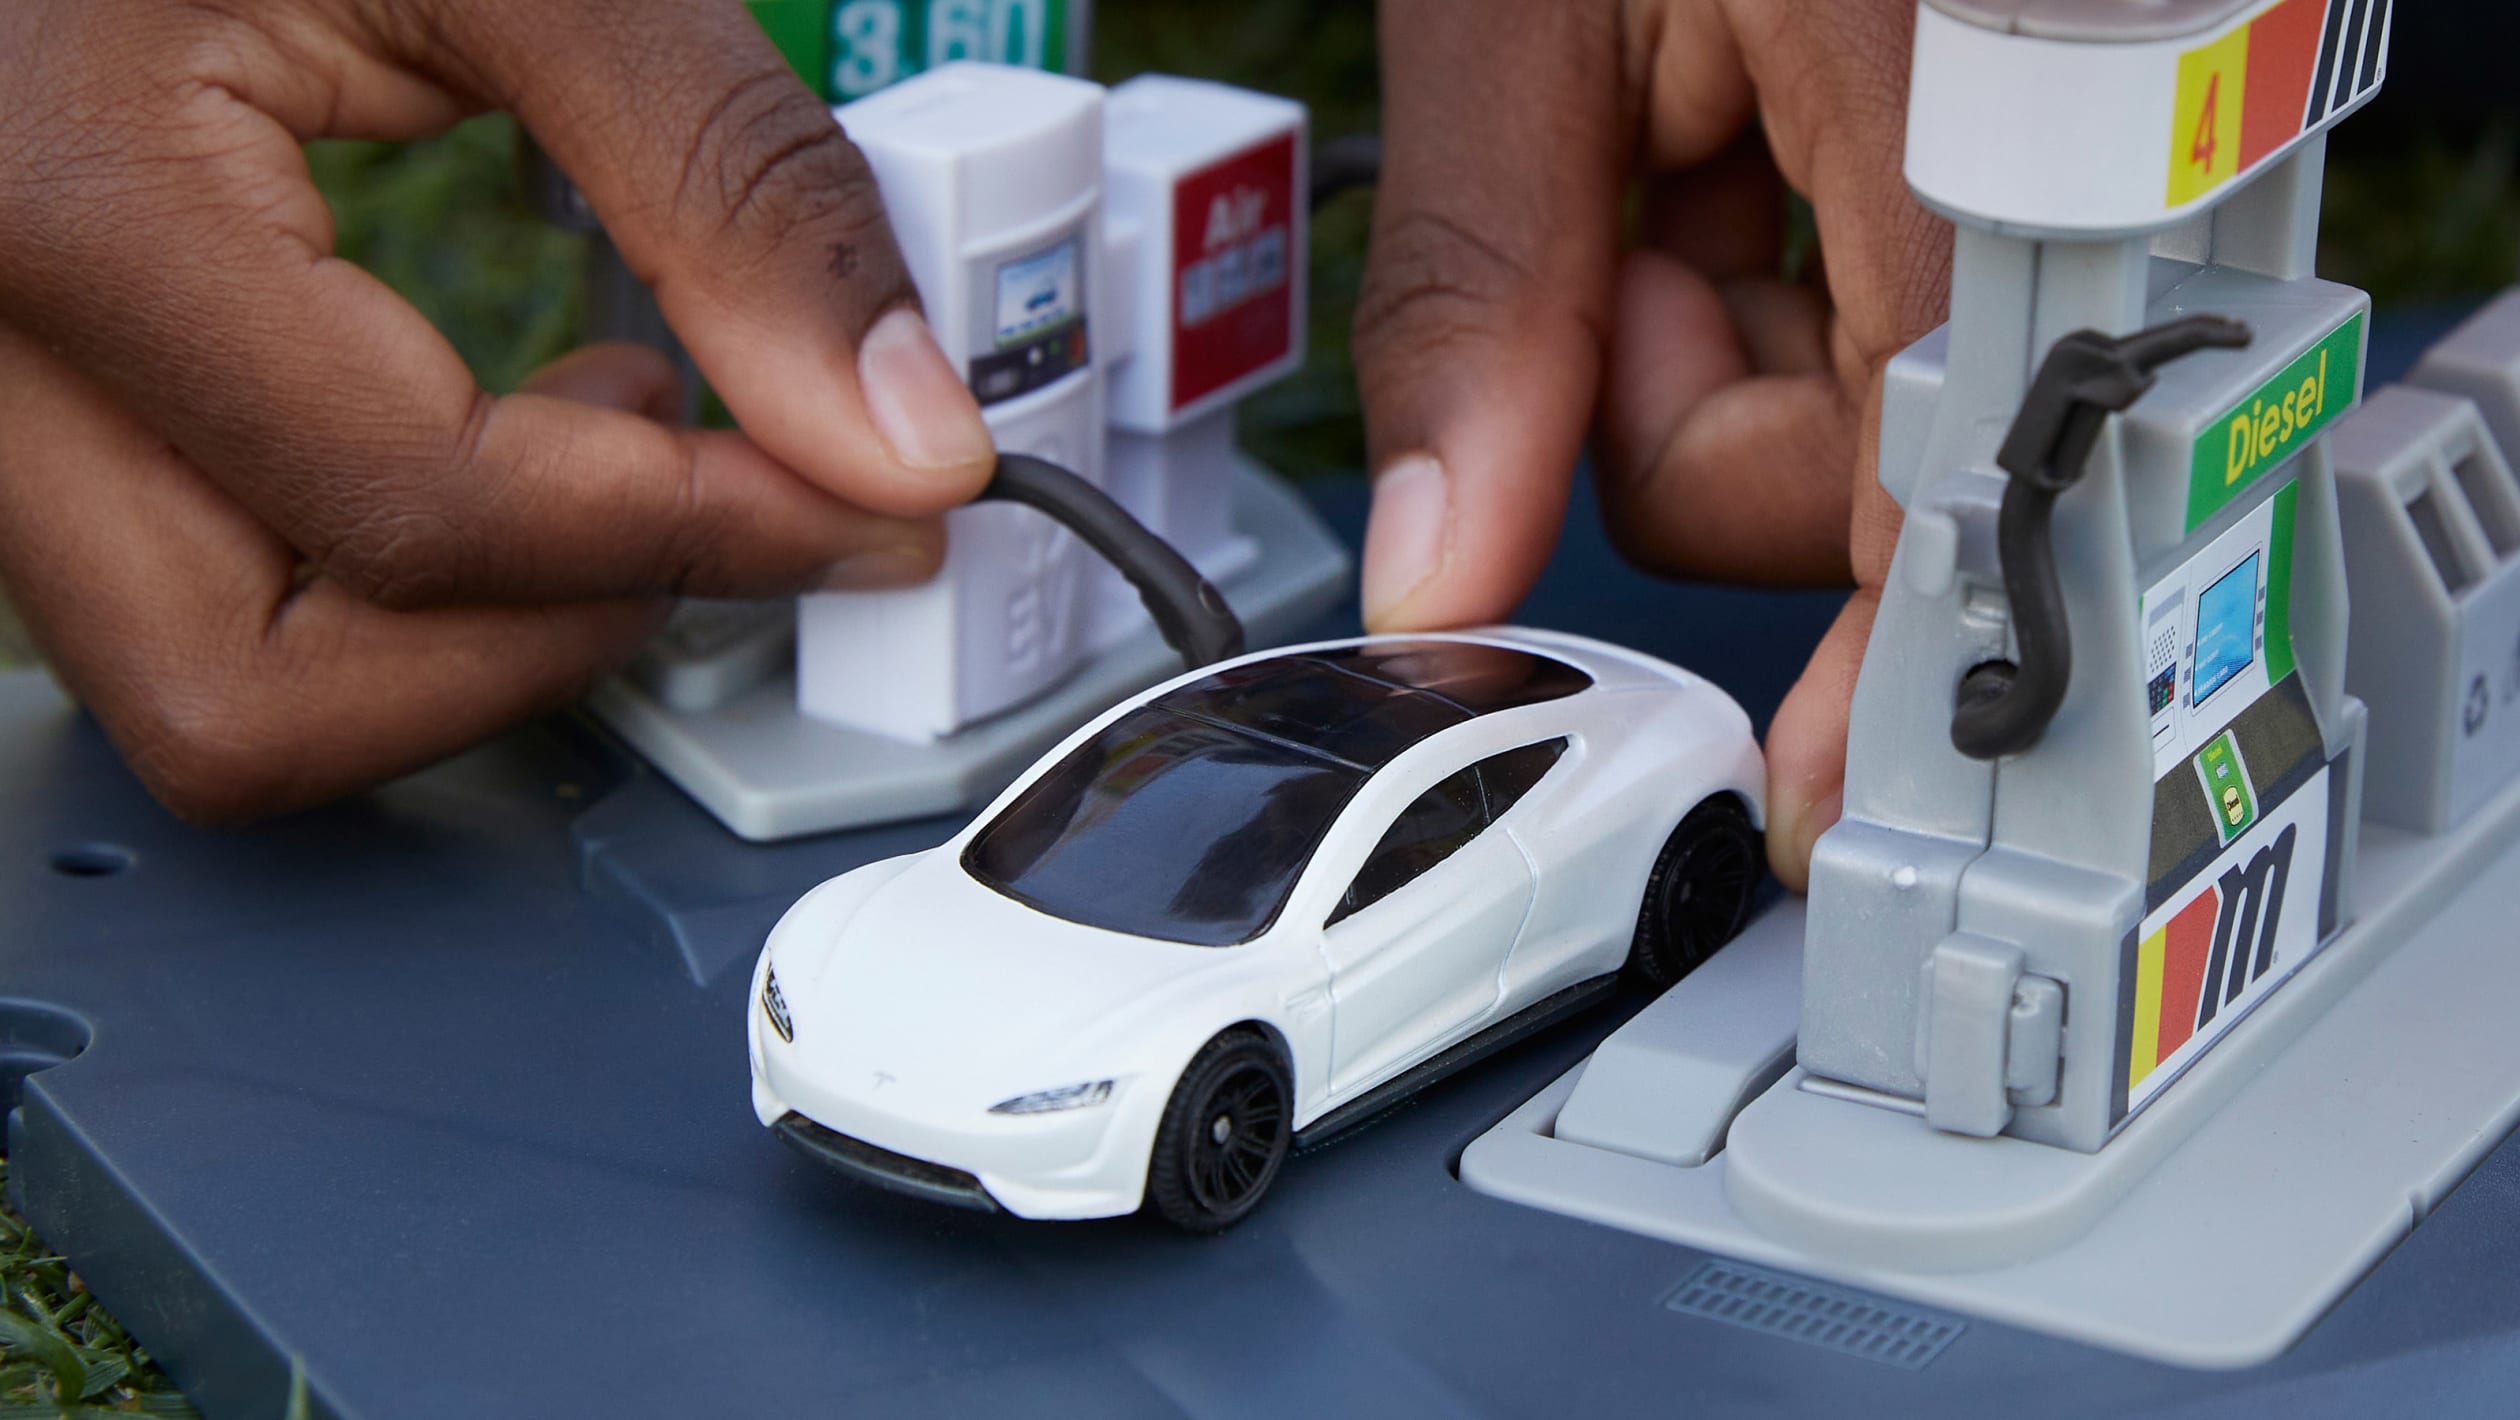 Matchbox launches carbon neutral toy cars